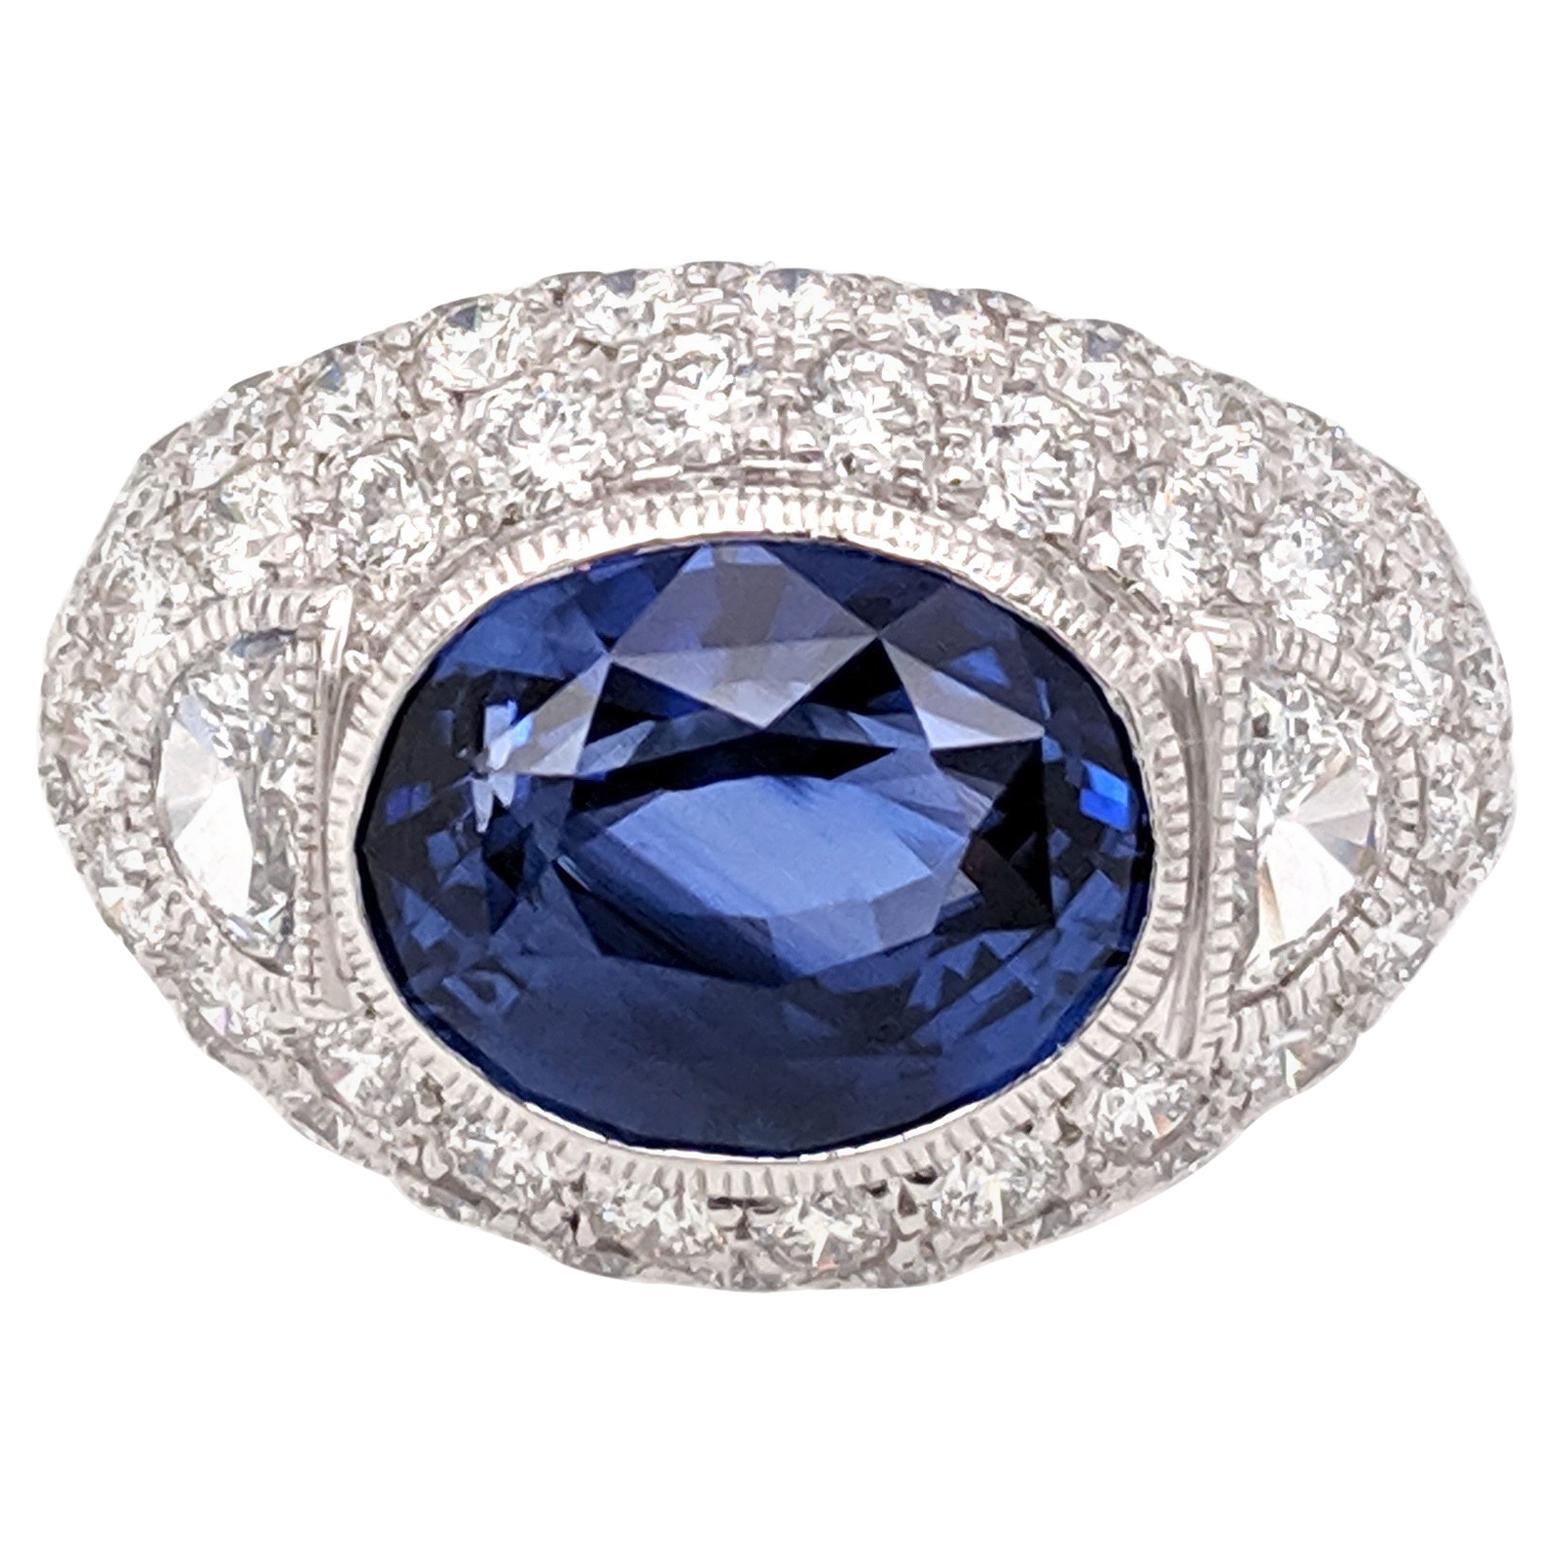 GIA Certified 8.23 Carat Sapphire Diamond Domed Cocktail Ring For Sale